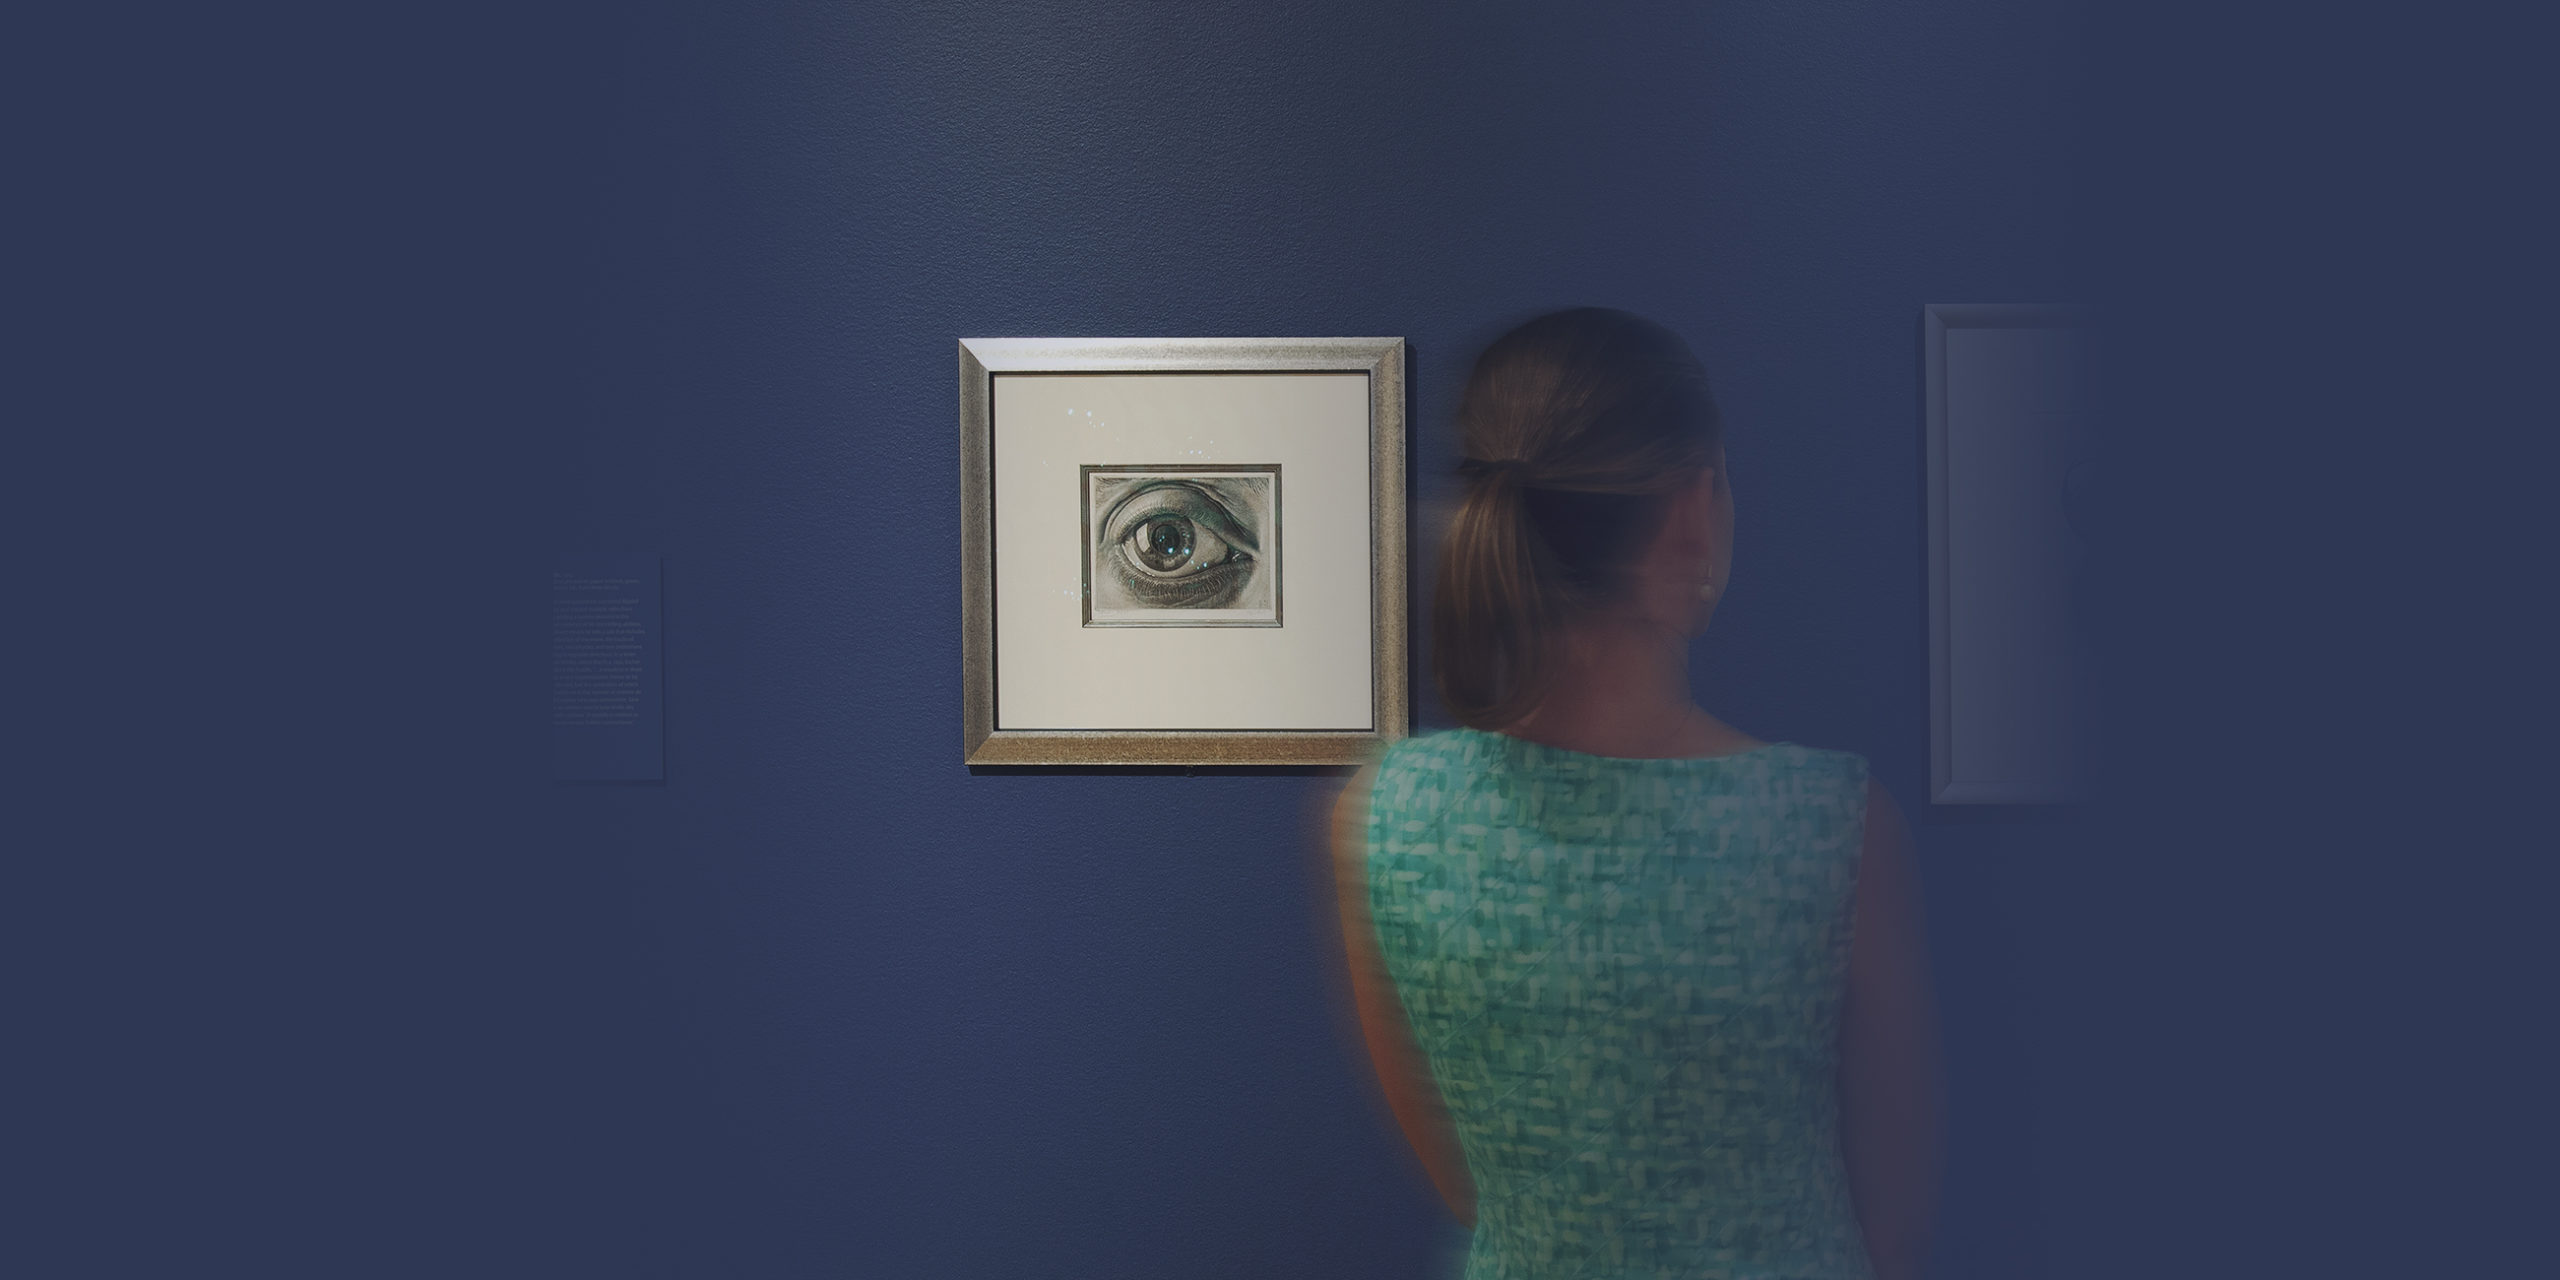 woman in green dress with back to the camera in front of a sketch of an eye